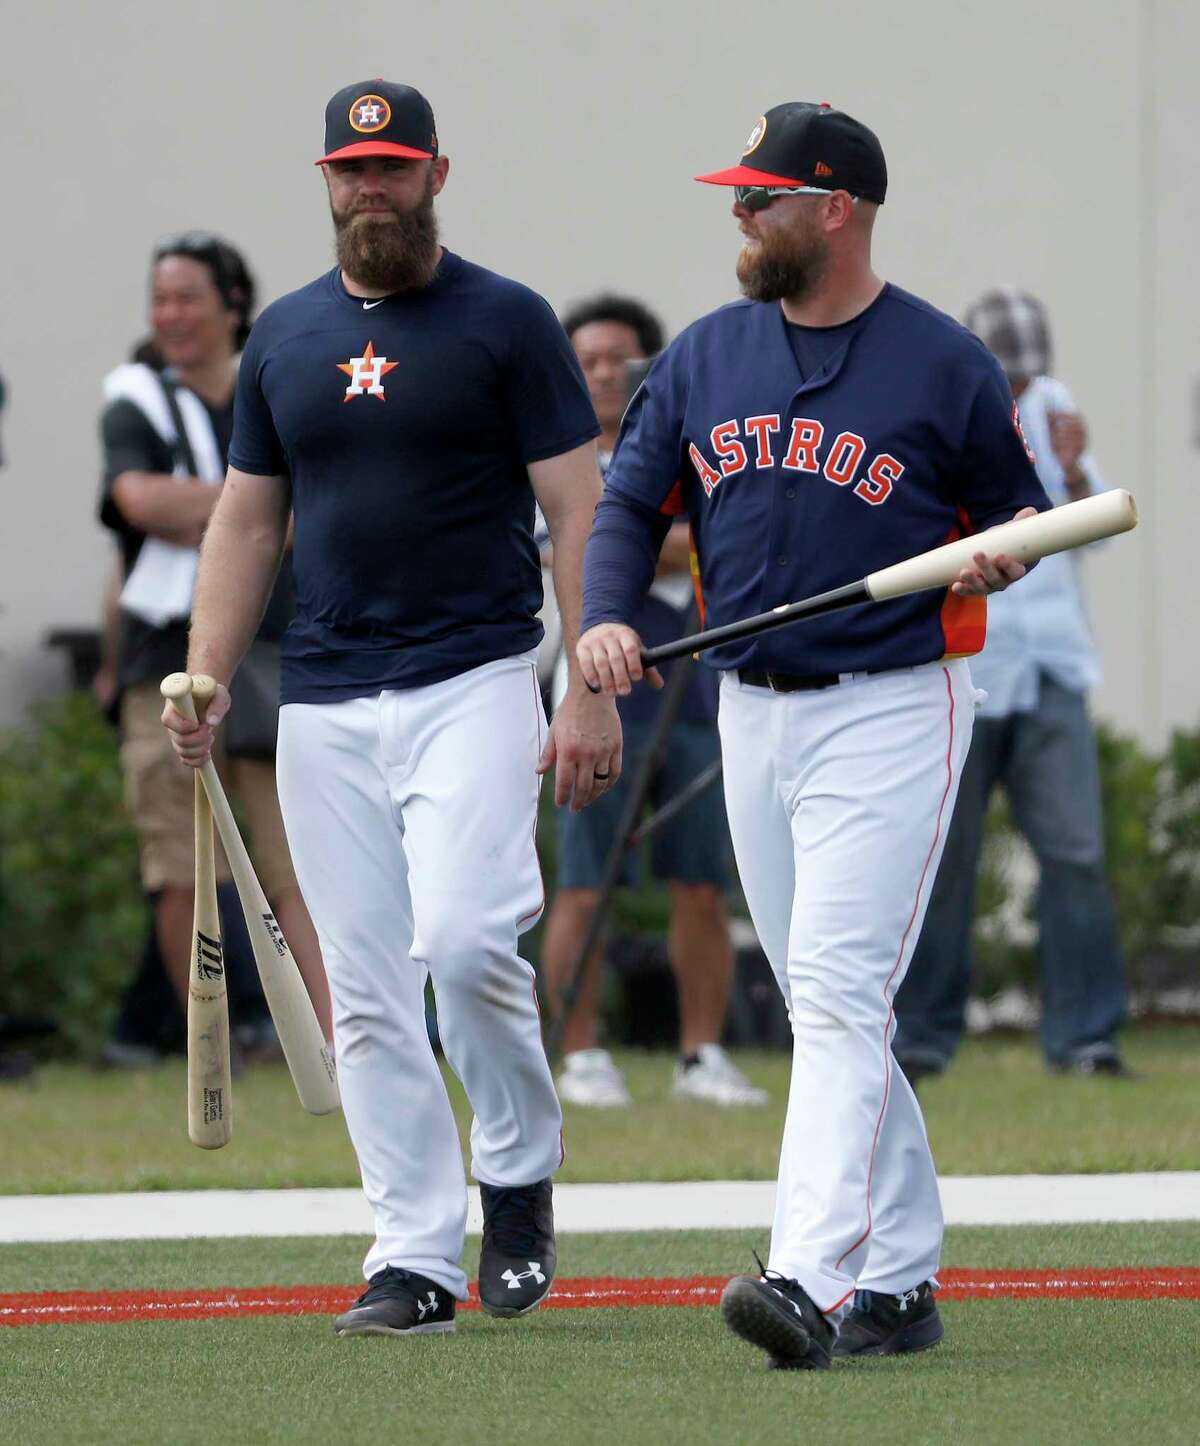 Evan Gattis, left, and Brian McCann caught 49 and 95 games, respectively, for the Astros last year and combined for 30 homers, 88 runs and 117 RBIs on the offensive side.